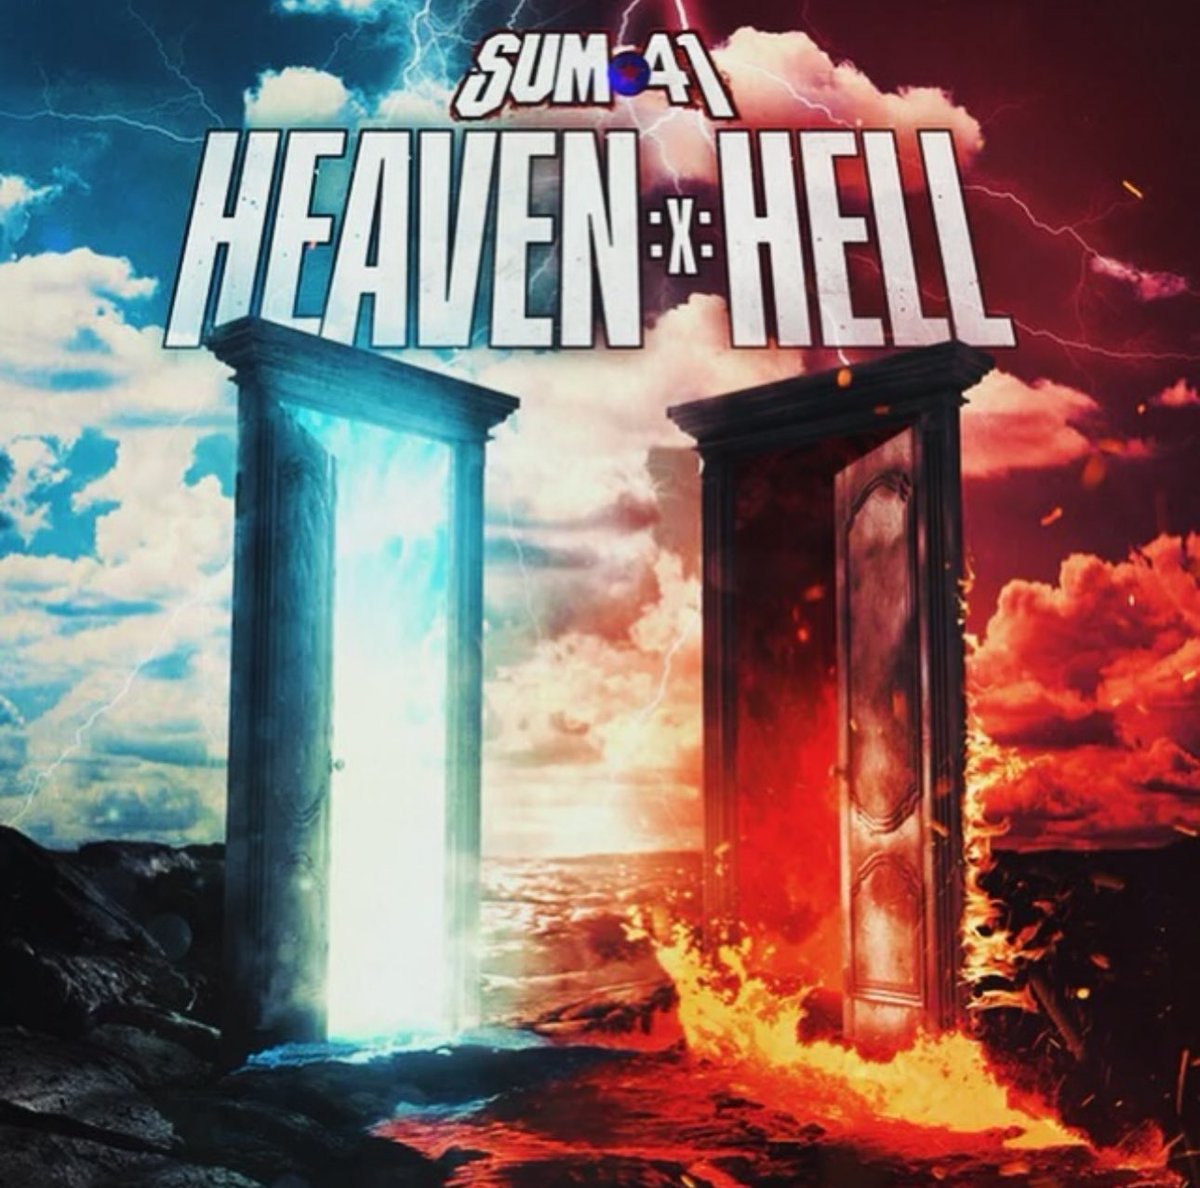 Heaven :x: Hell is out! The final #sum41 album. The feels are bittersweet for sure ❤️:x:💔 Congratulations and love to my bandmates and everyone involved in making this record happen! Have a listen & lmk what your favorite tunes are!